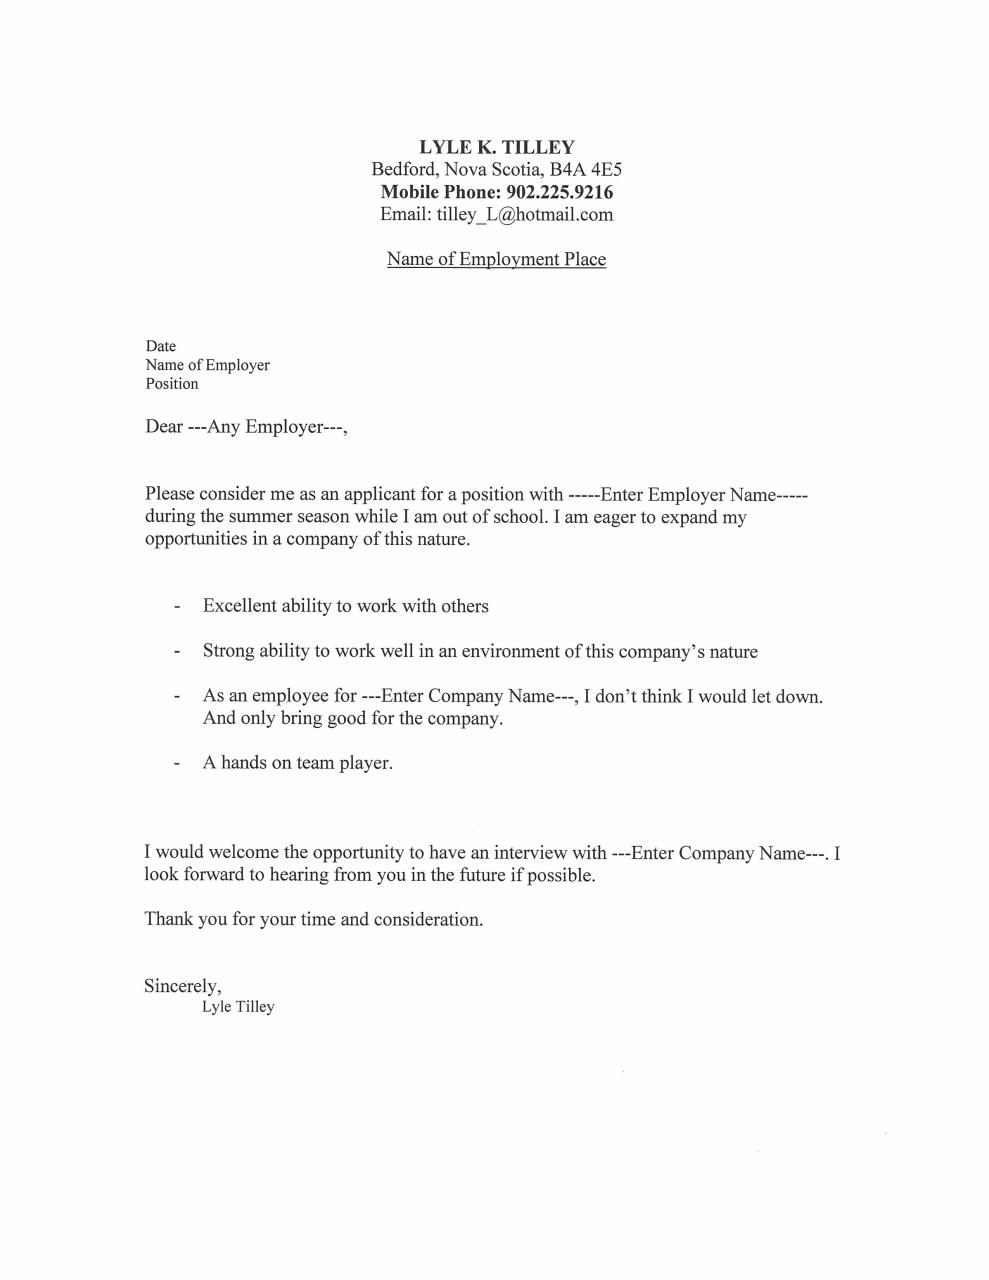 How To Create A Resume Cover Letter